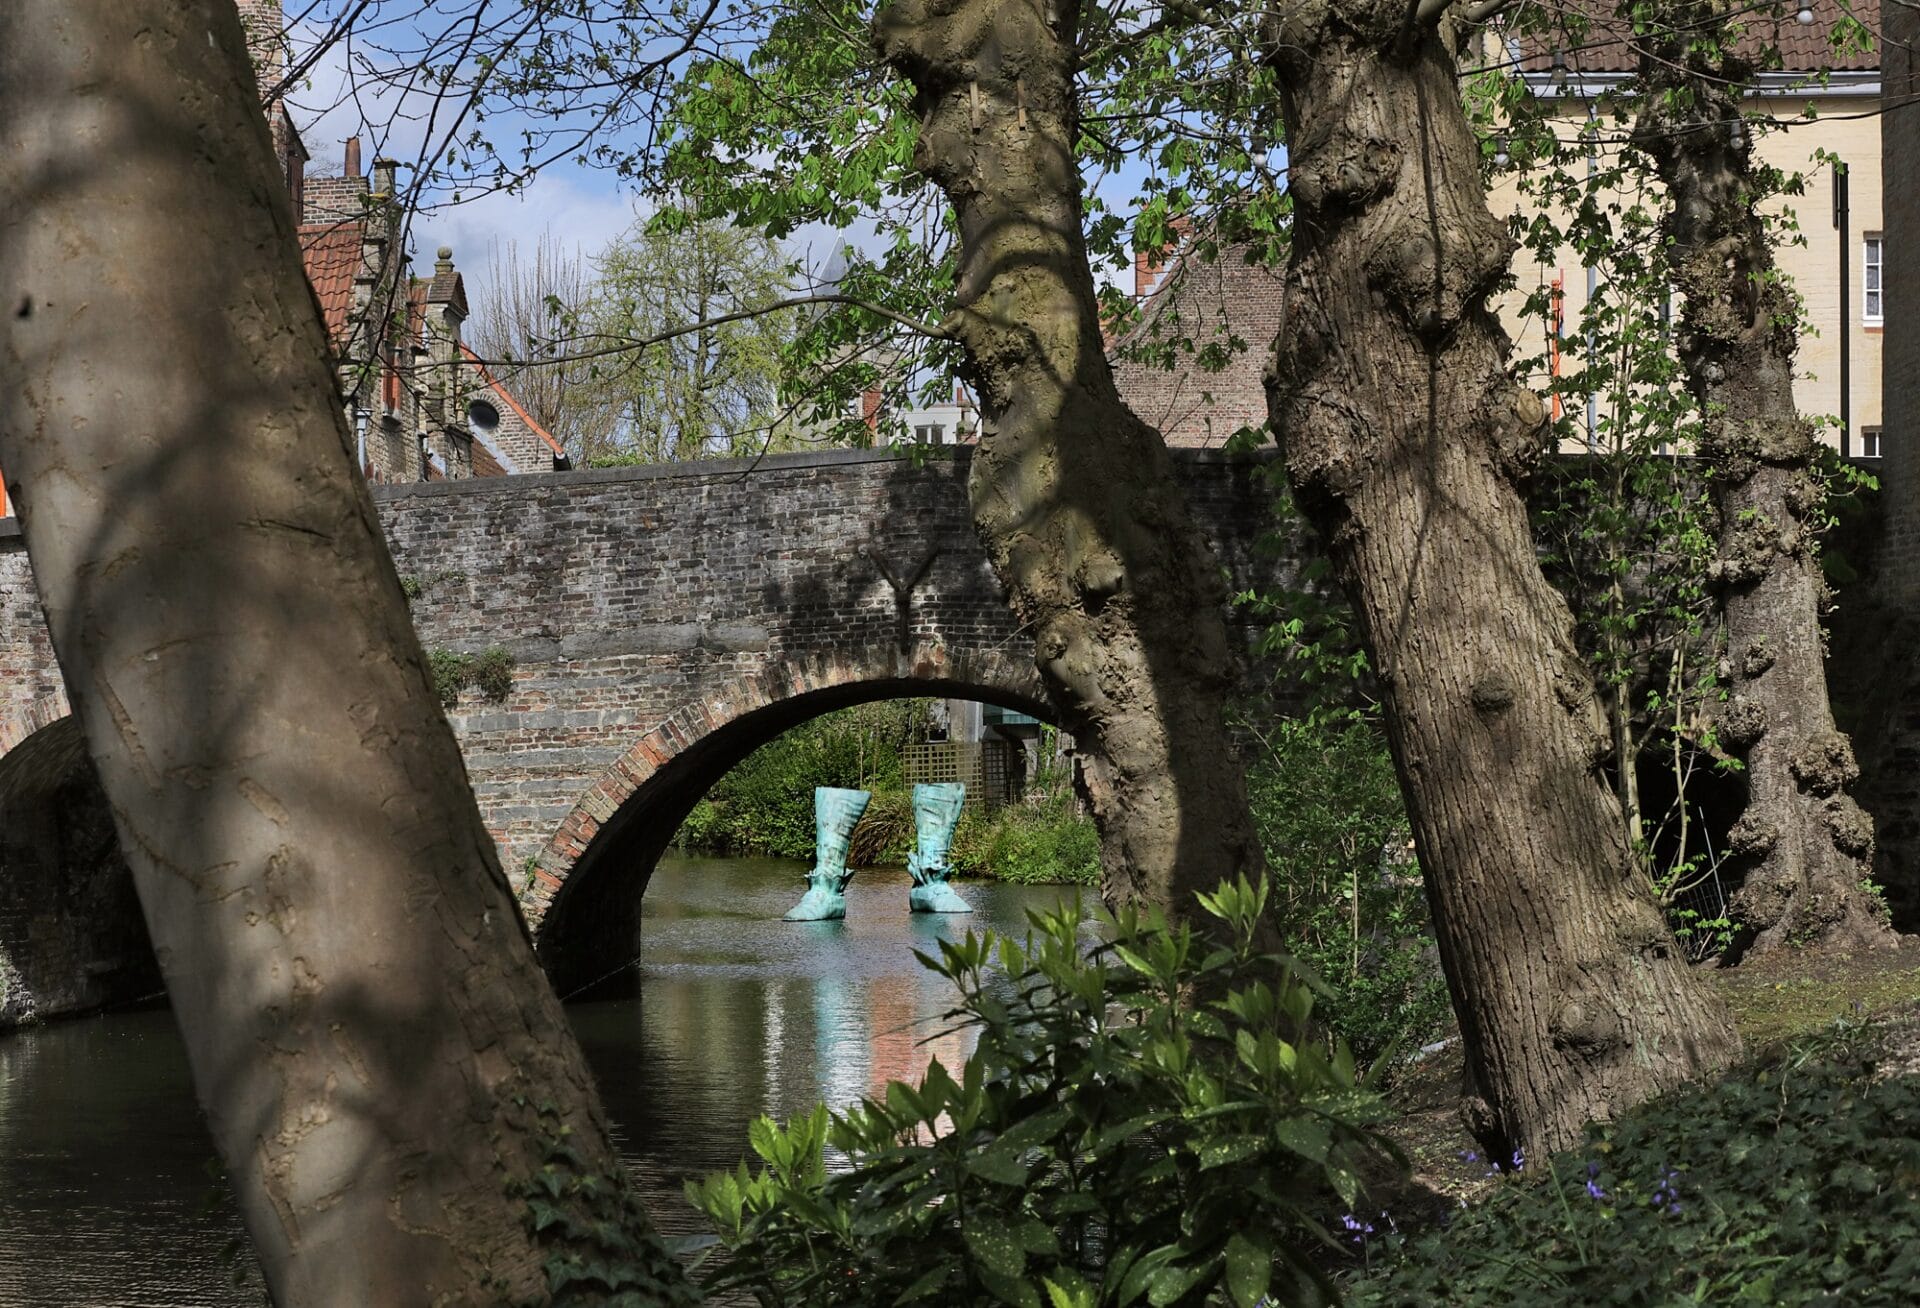 a sculpture of a pair of 18th-century style boots cast in bronze and installed in a bruges canal, seen through some trees and under the arch of a foot bridge